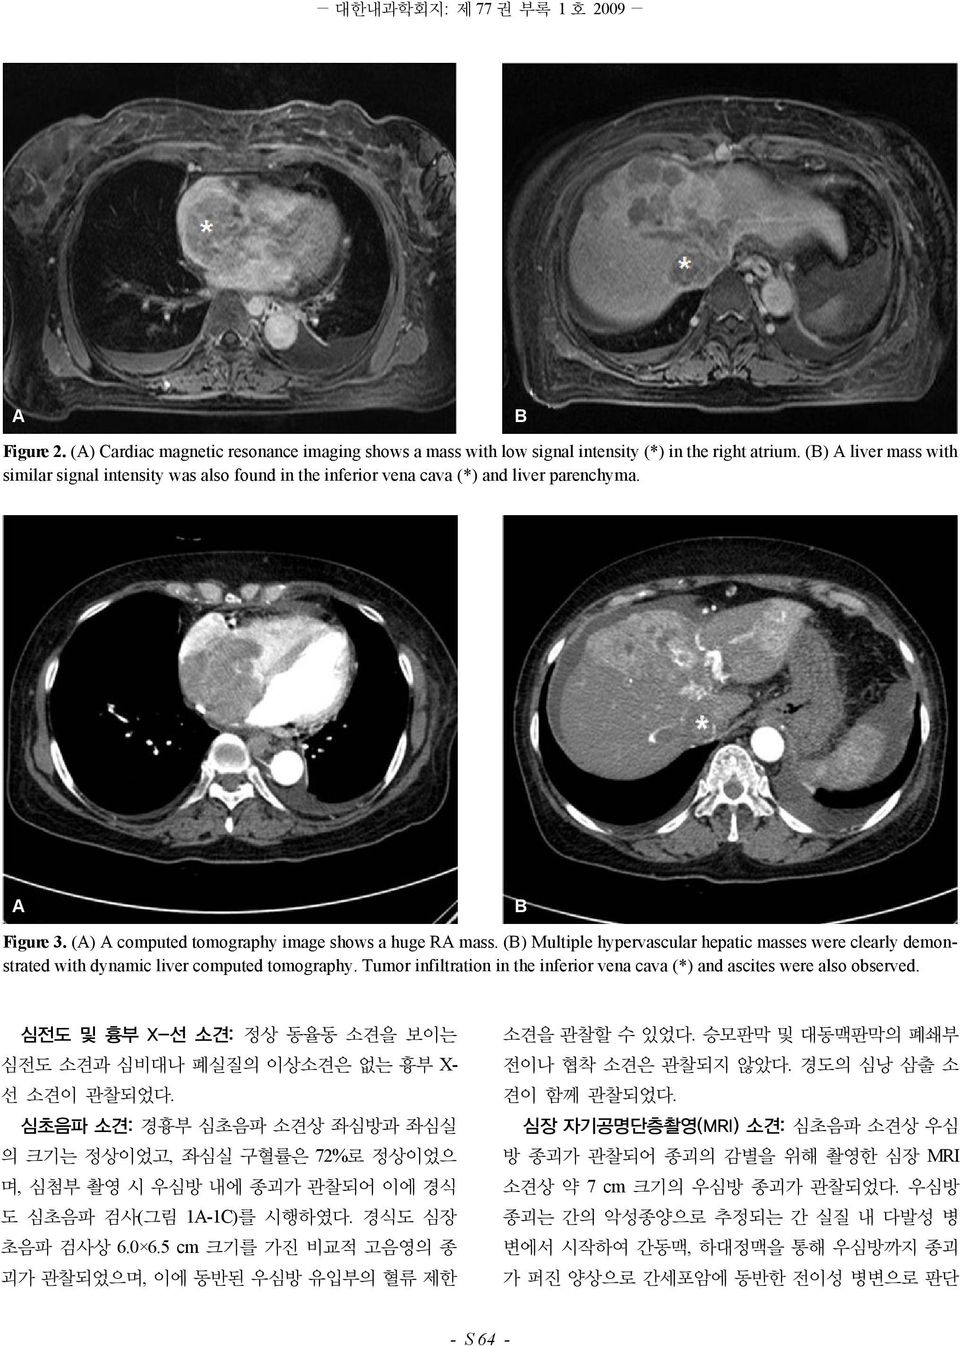 () Multiple hypervascular hepatic masses were clearly demonstrated with dynamic liver computed tomography. Tumor infiltration in the inferior vena cava (*) and ascites were also observed.